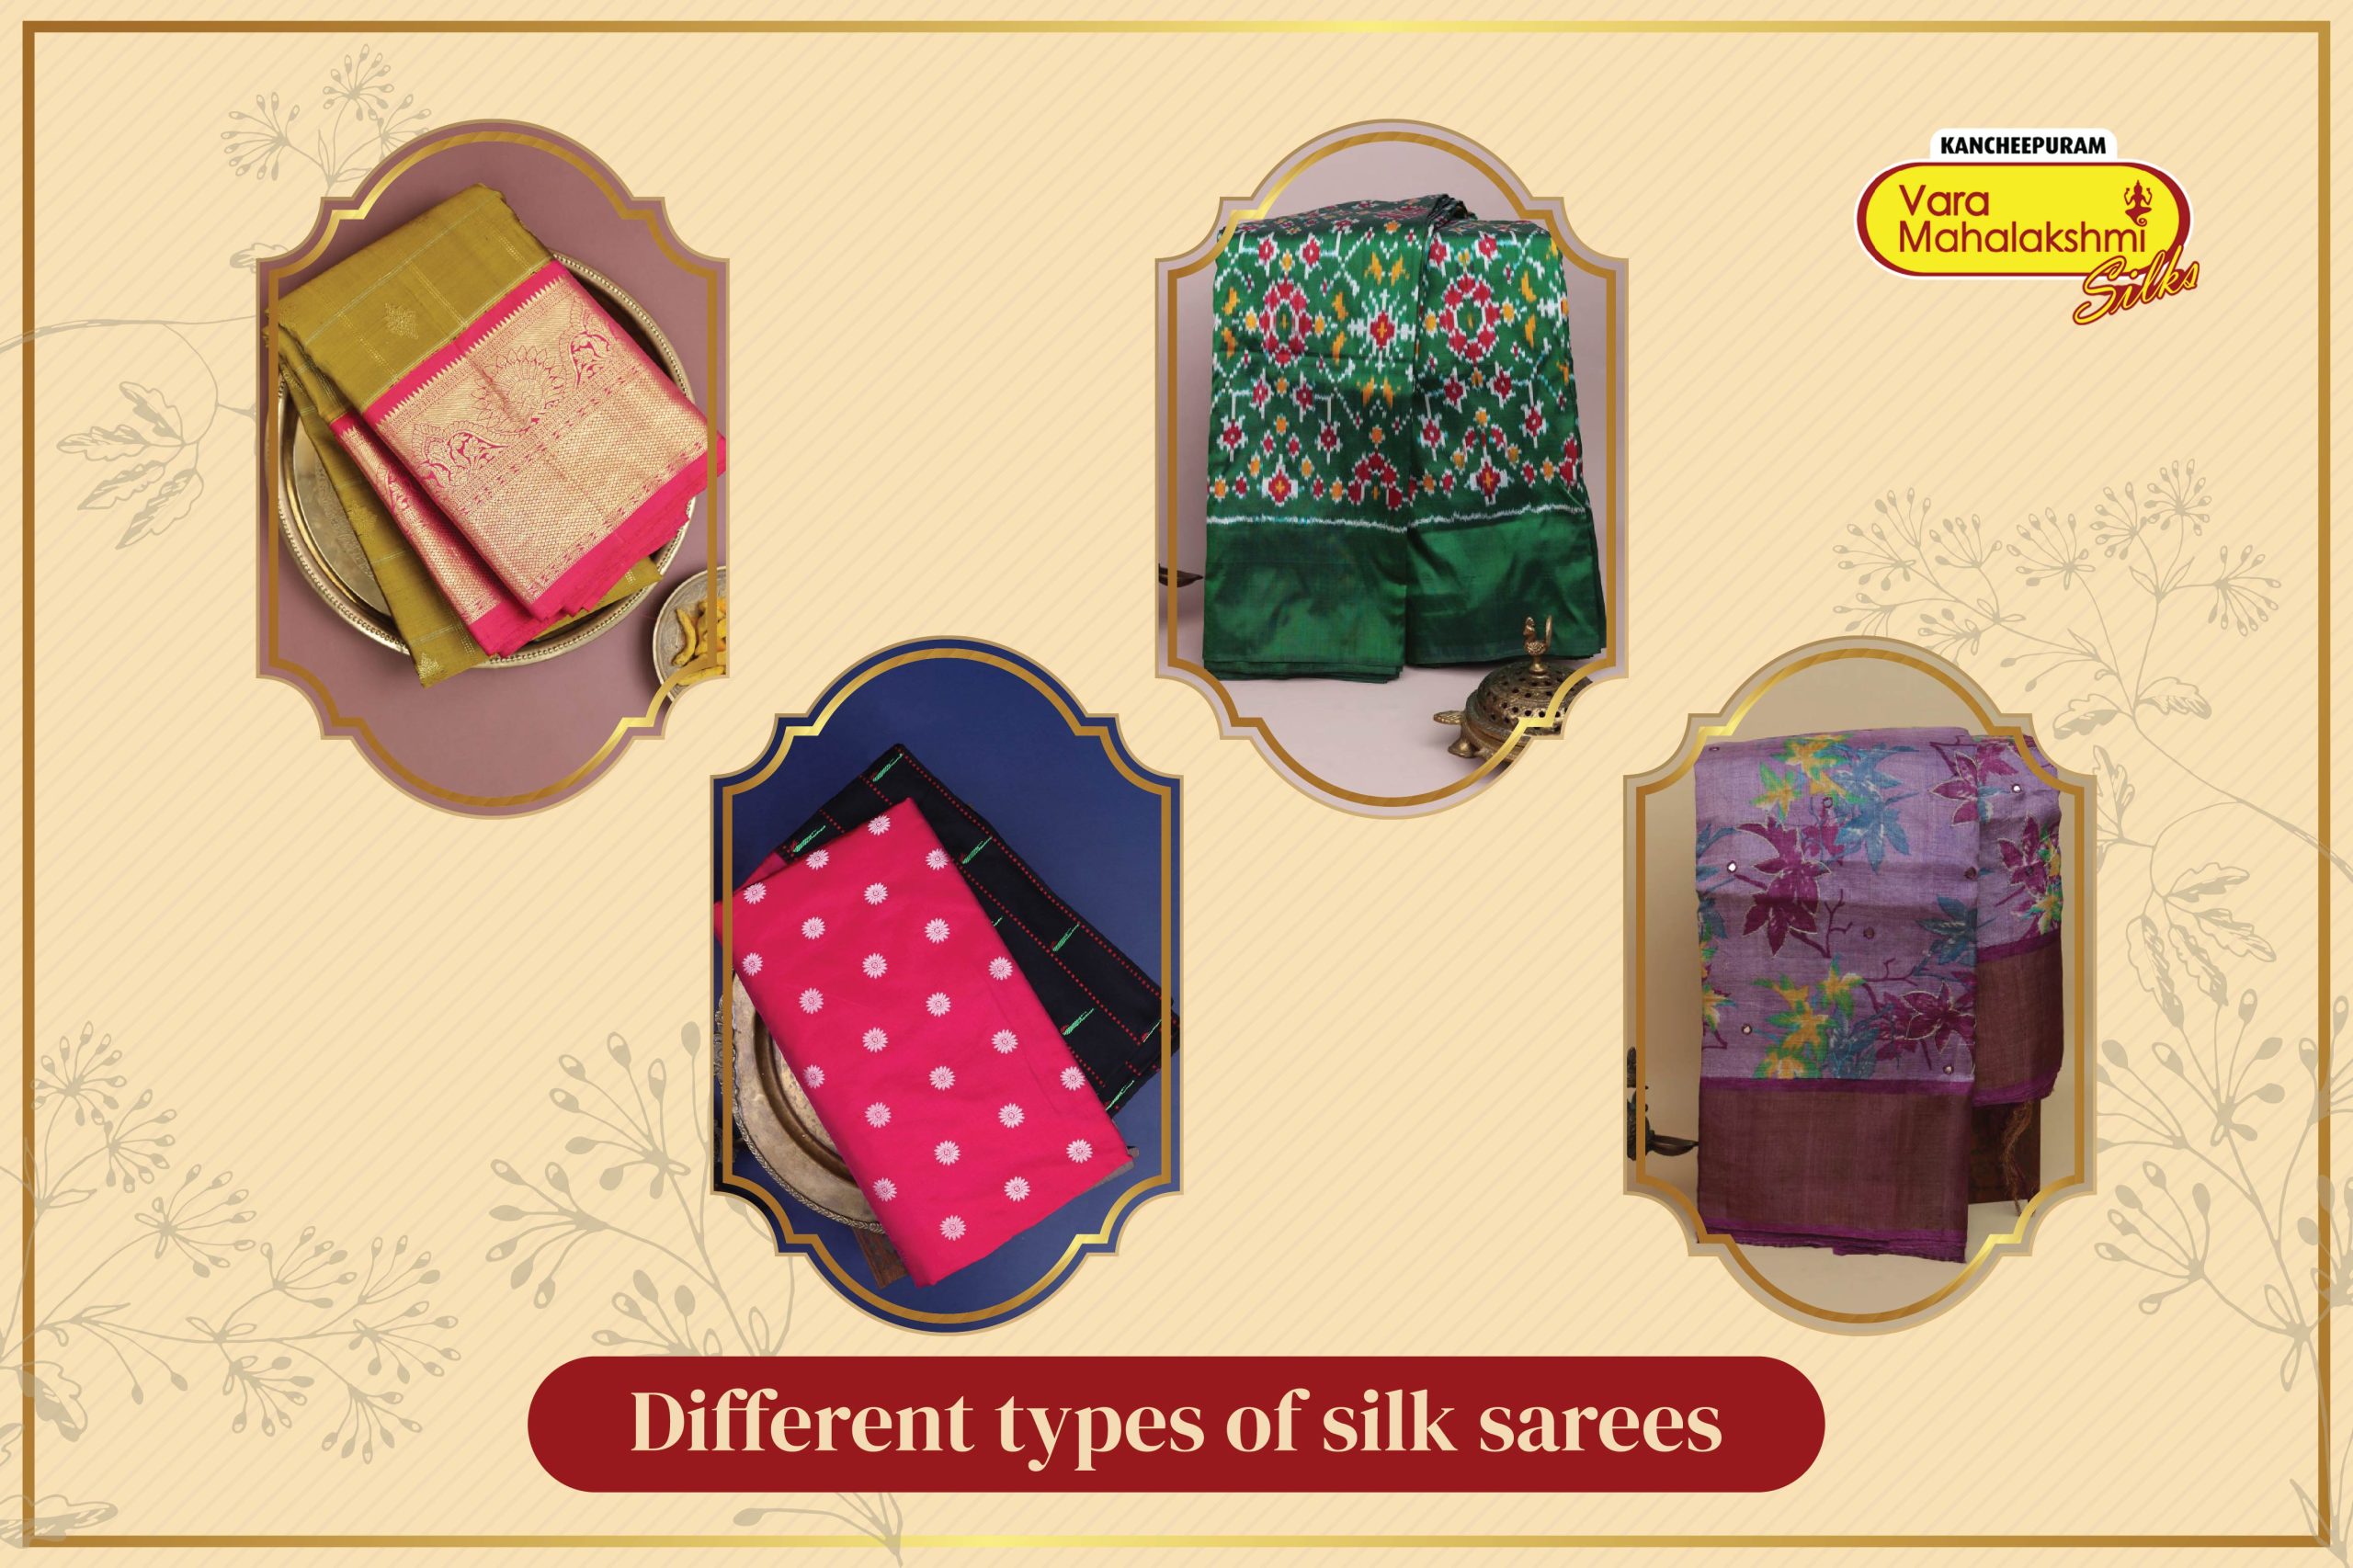 What are the different types of silk sarees